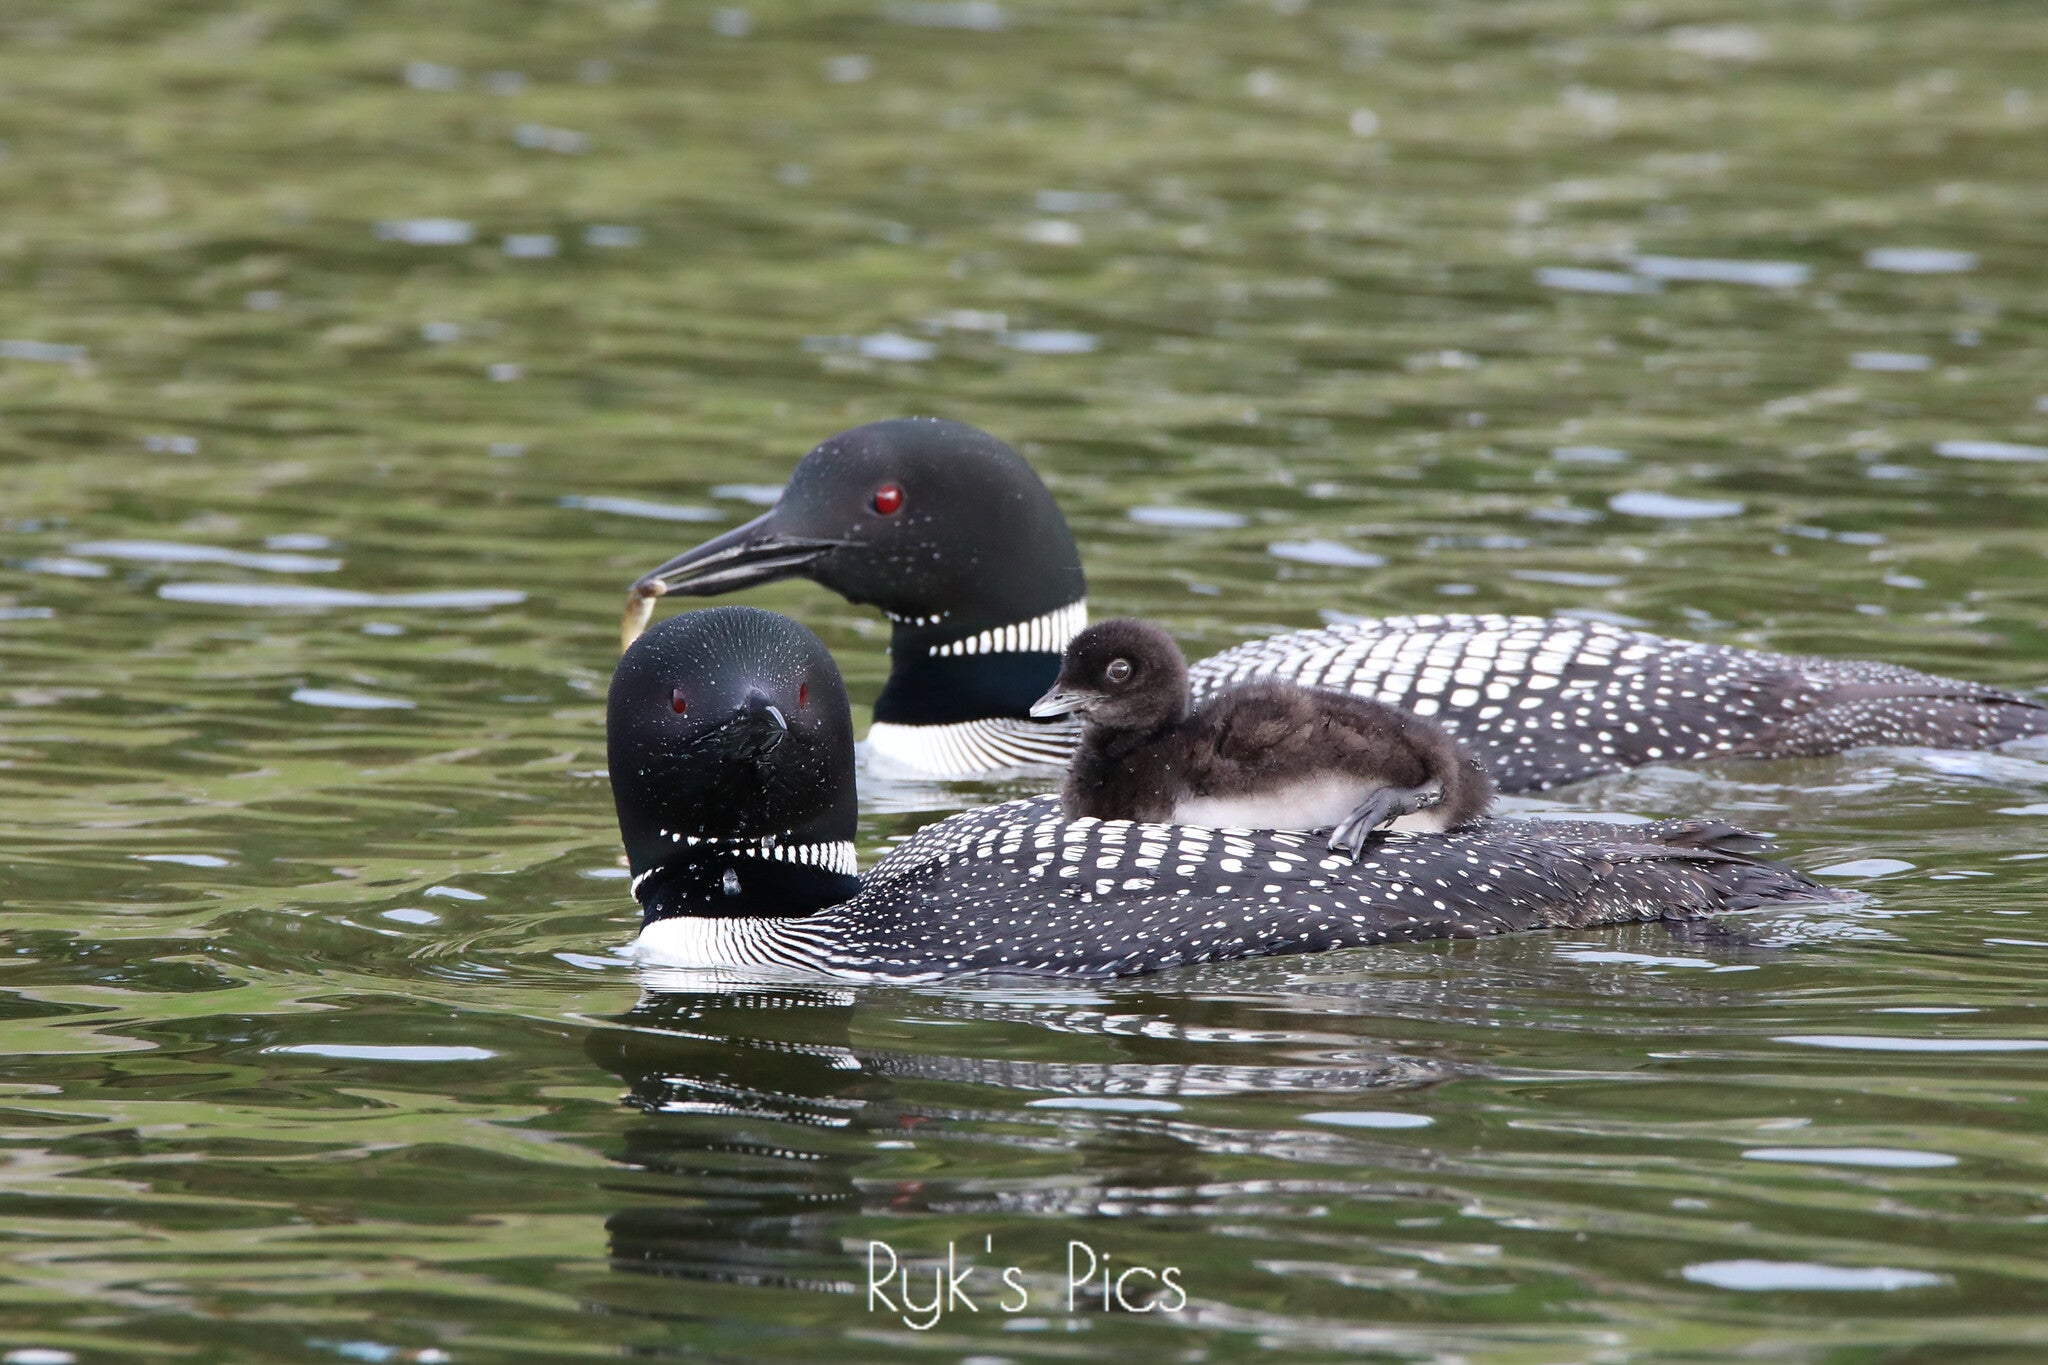 Turtle Caught Sunning Itself on the Back of a Loon